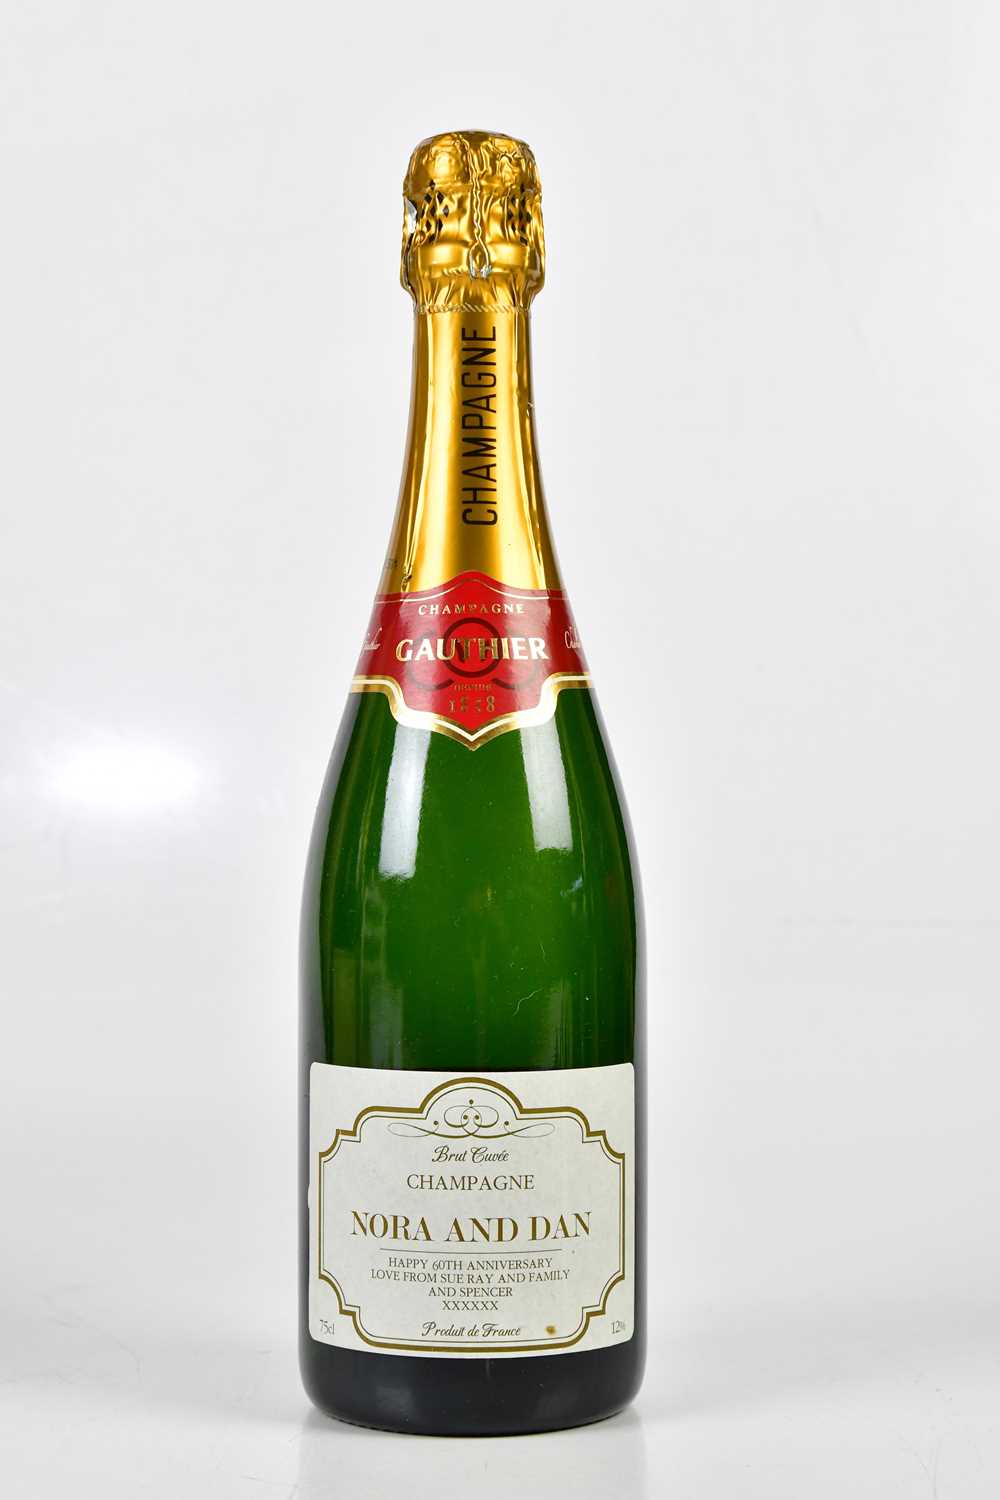 CHAMPAGNE; a magnum bottle of Moët & Chandon, Brut Imperial, 150cl, 12%, and a bottle of Gauthier, - Image 2 of 5